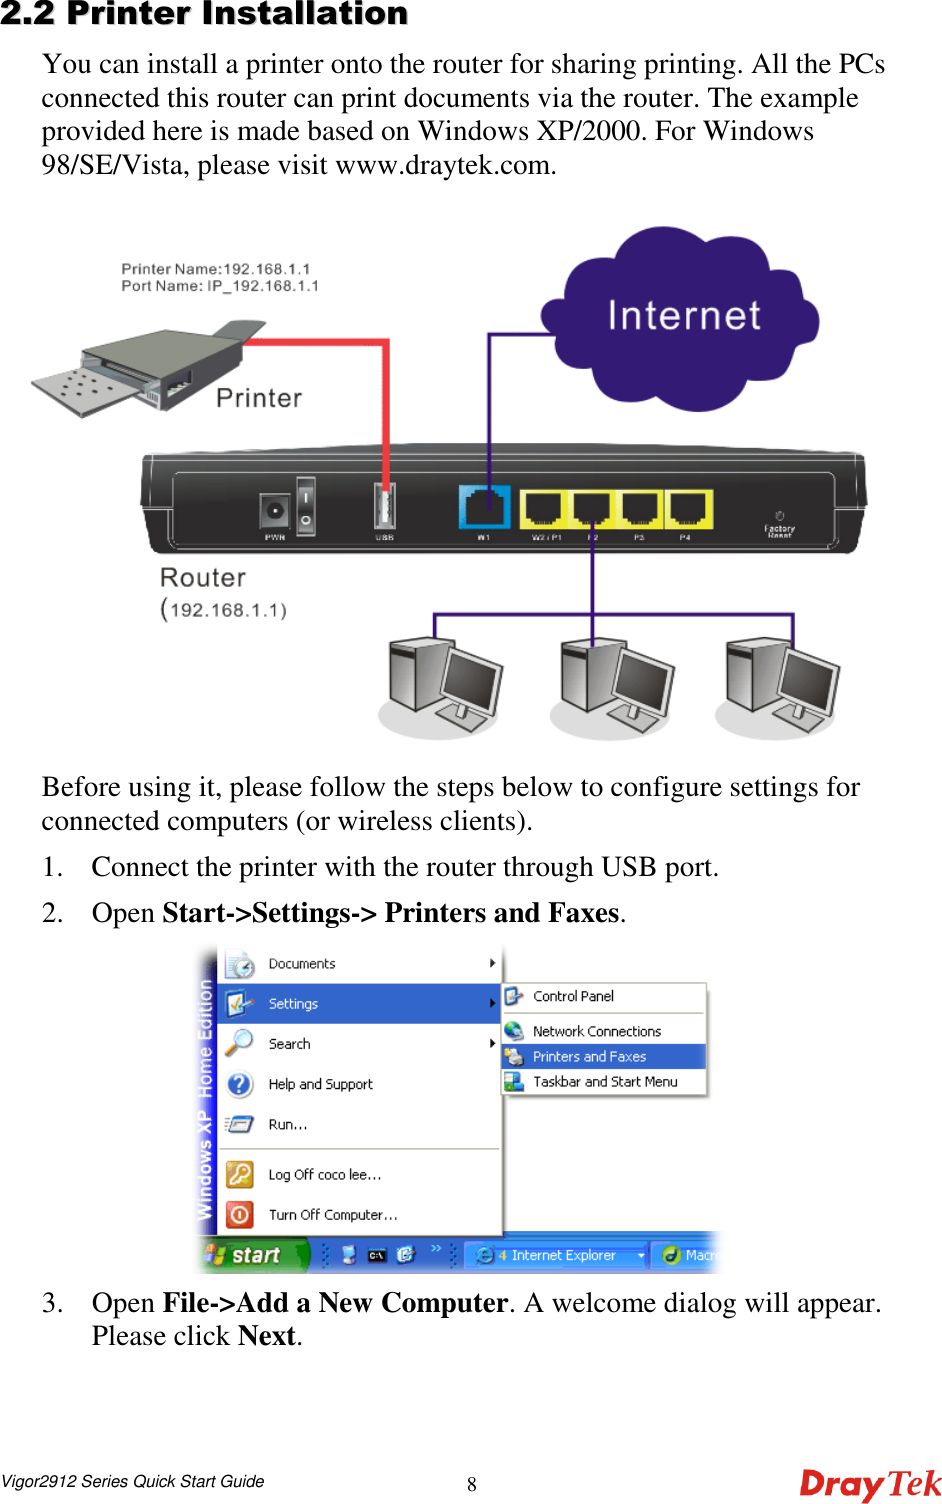  Vigor2912 Series Quick Start Guide 8 22..22  PPrriinntteerr  IInnssttaallllaattiioonn  You can install a printer onto the router for sharing printing. All the PCs connected this router can print documents via the router. The example provided here is made based on Windows XP/2000. For Windows 98/SE/Vista, please visit www.draytek.com.  Before using it, please follow the steps below to configure settings for connected computers (or wireless clients). 1. Connect the printer with the router through USB port. 2. Open Start-&gt;Settings-&gt; Printers and Faxes.  3. Open File-&gt;Add a New Computer. A welcome dialog will appear. Please click Next. 